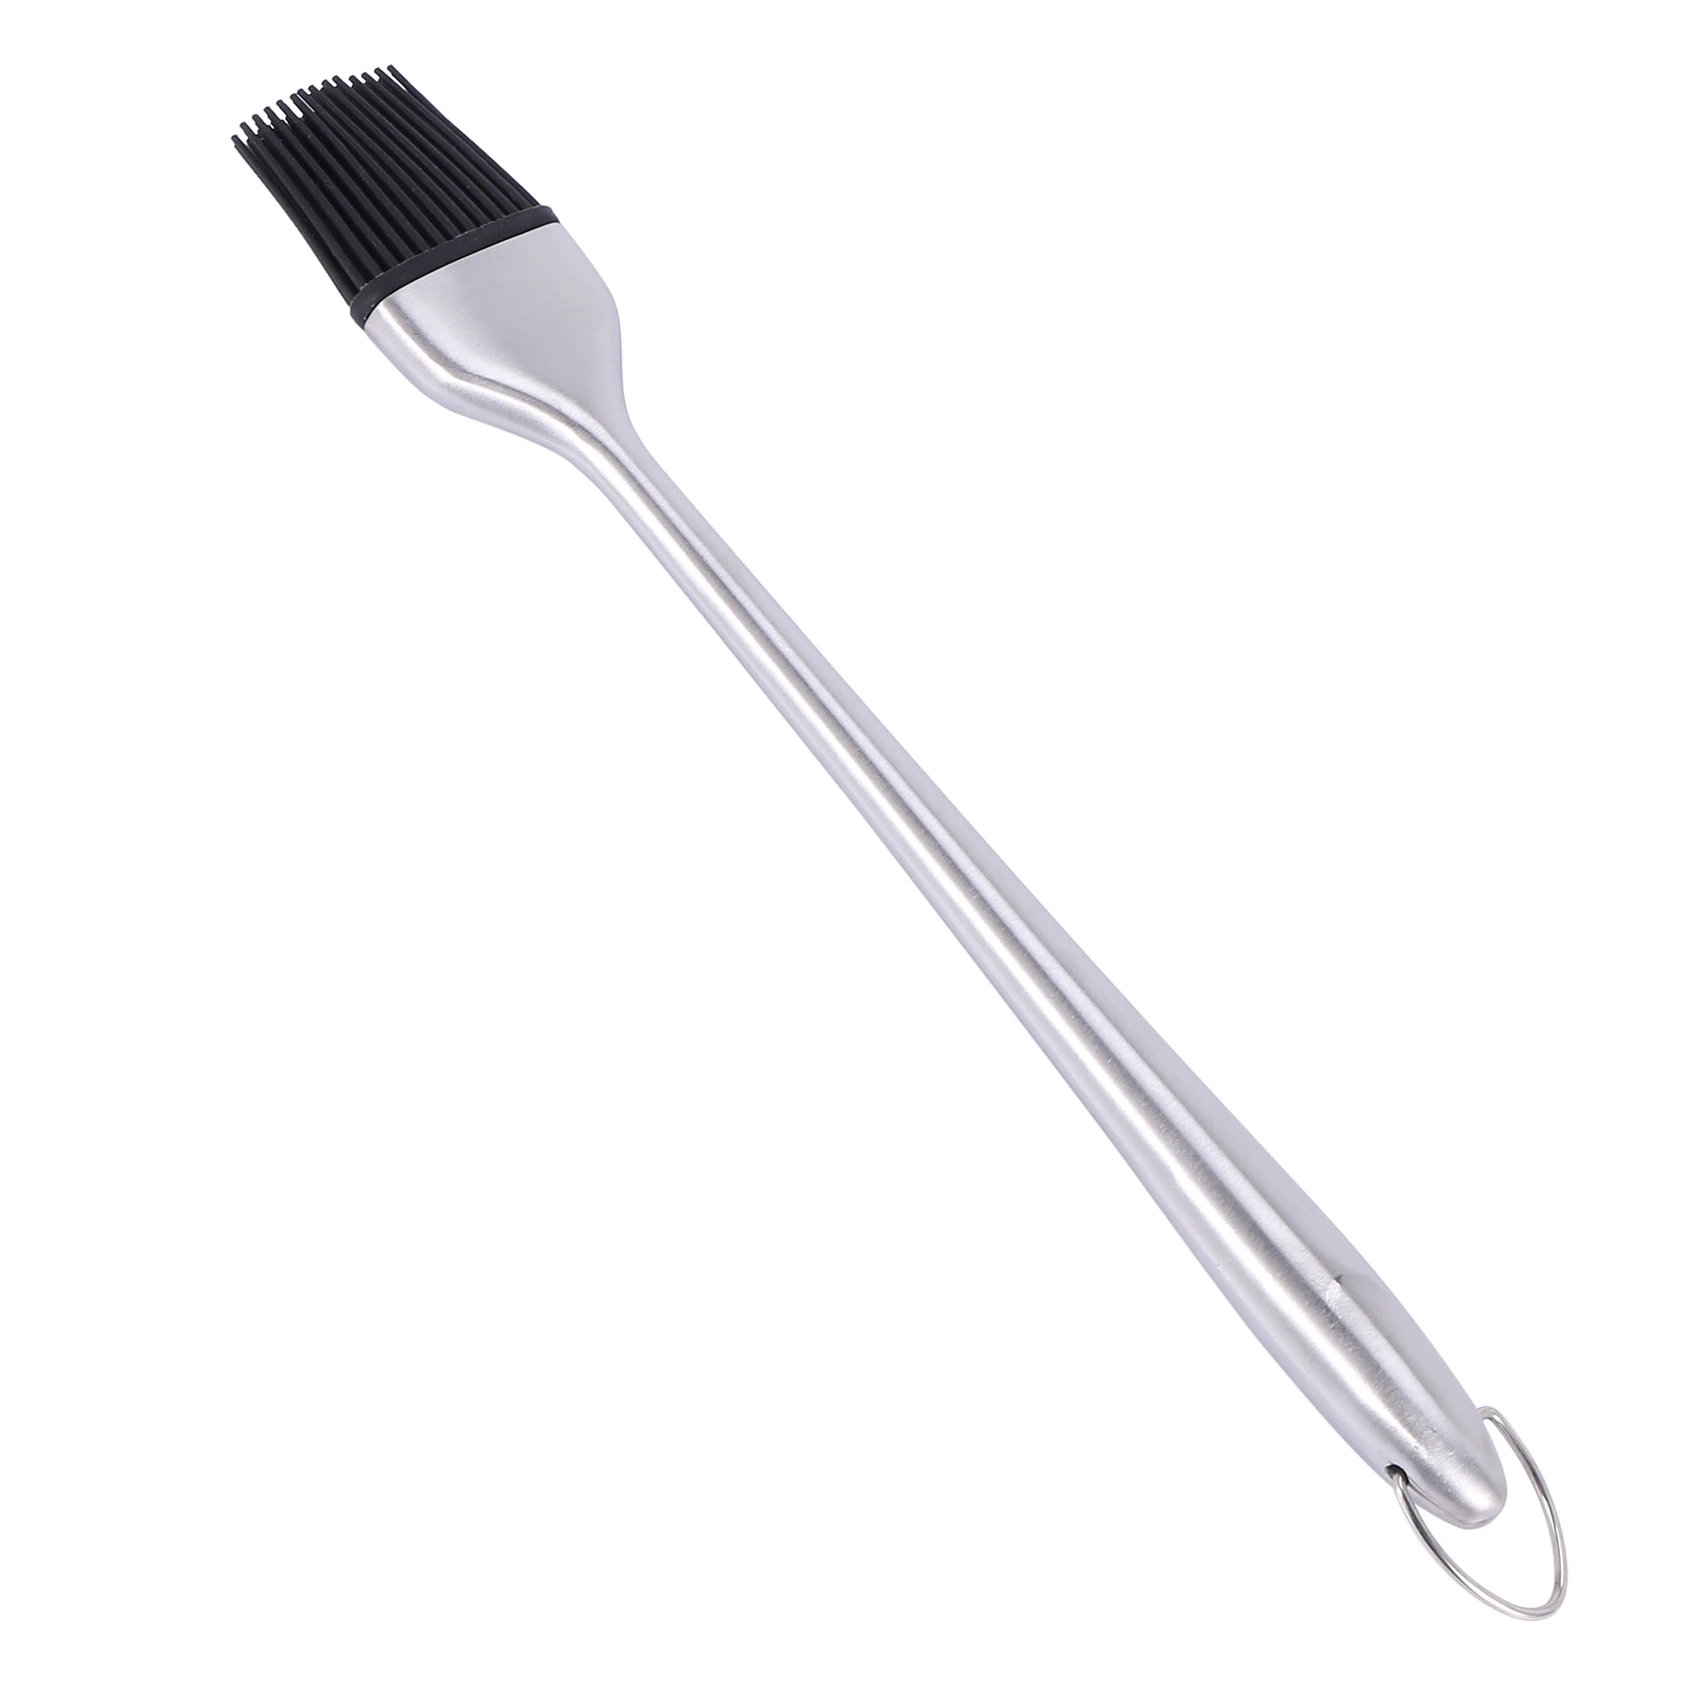 BBQ Basting Brush Silicone Bristles Stainless Steel Handle 